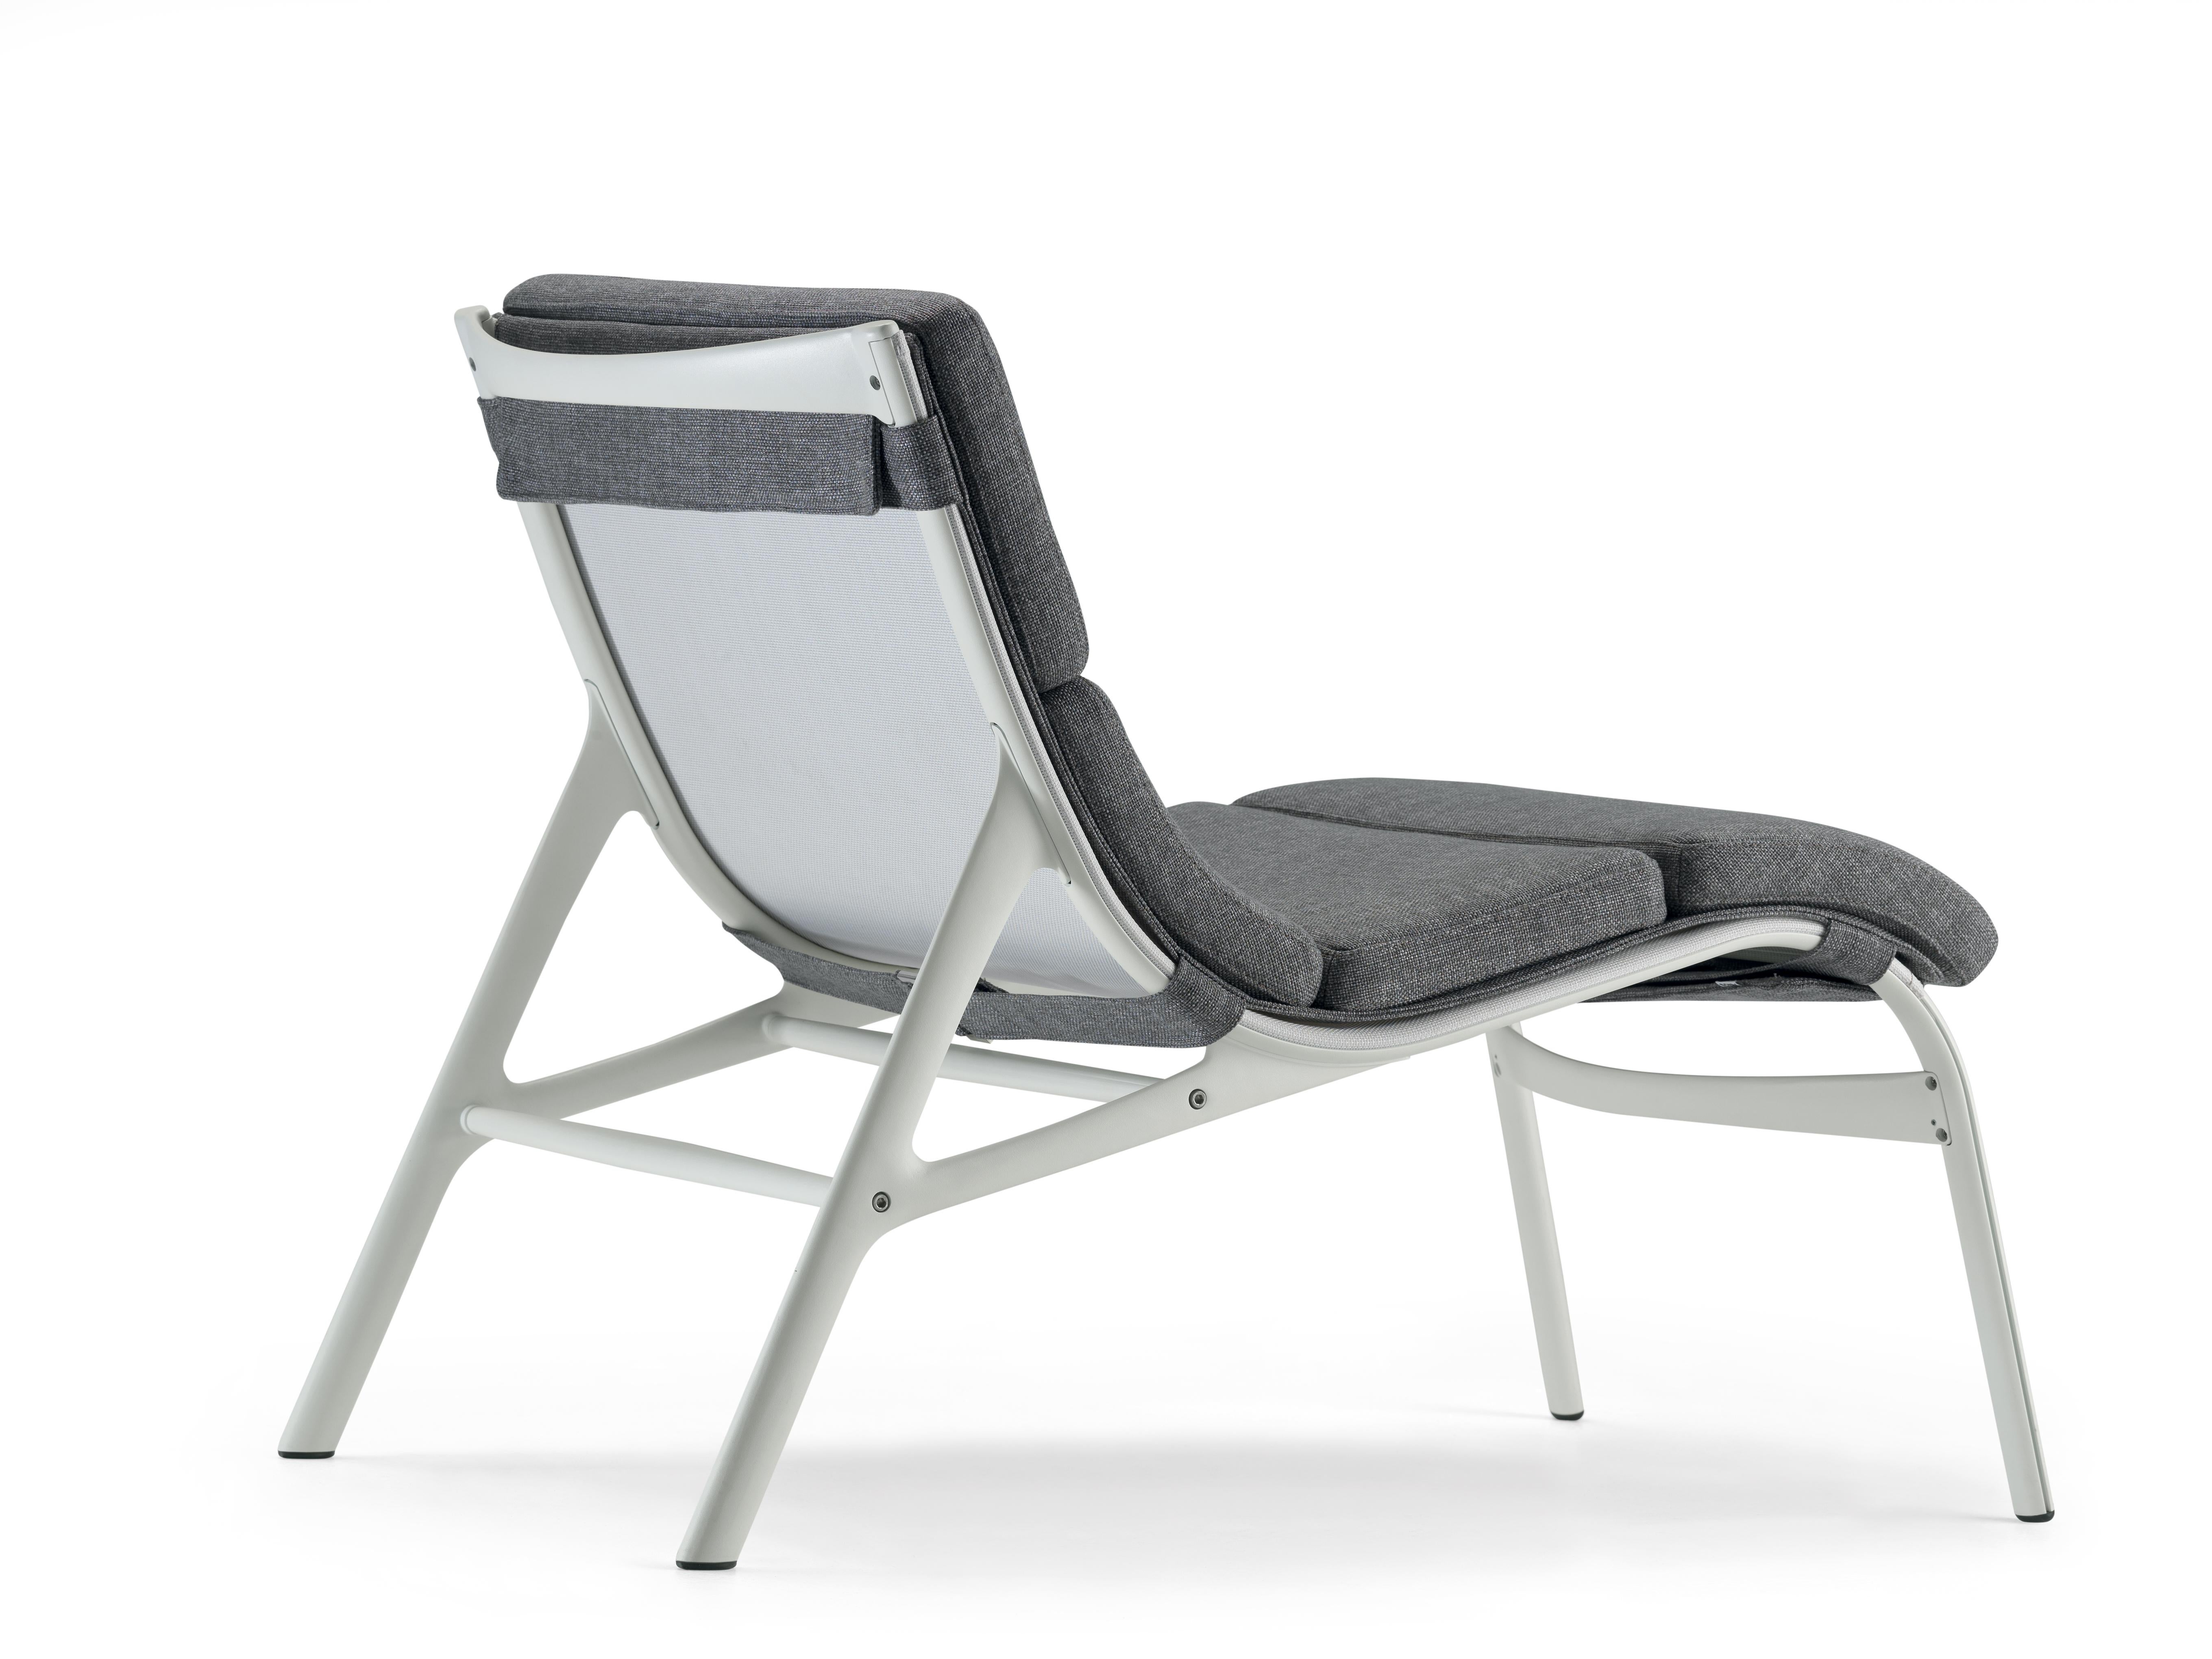 Alias 462 Armframe Soft Outdoor Chair in White Mesh/Grey Seat & Lacquered Frame by Alberto Meda

Easy chair for outdoor with structure made of extruded aluminium profile and die-cast aluminium elements. Seat and back in fire retardant PVC covered